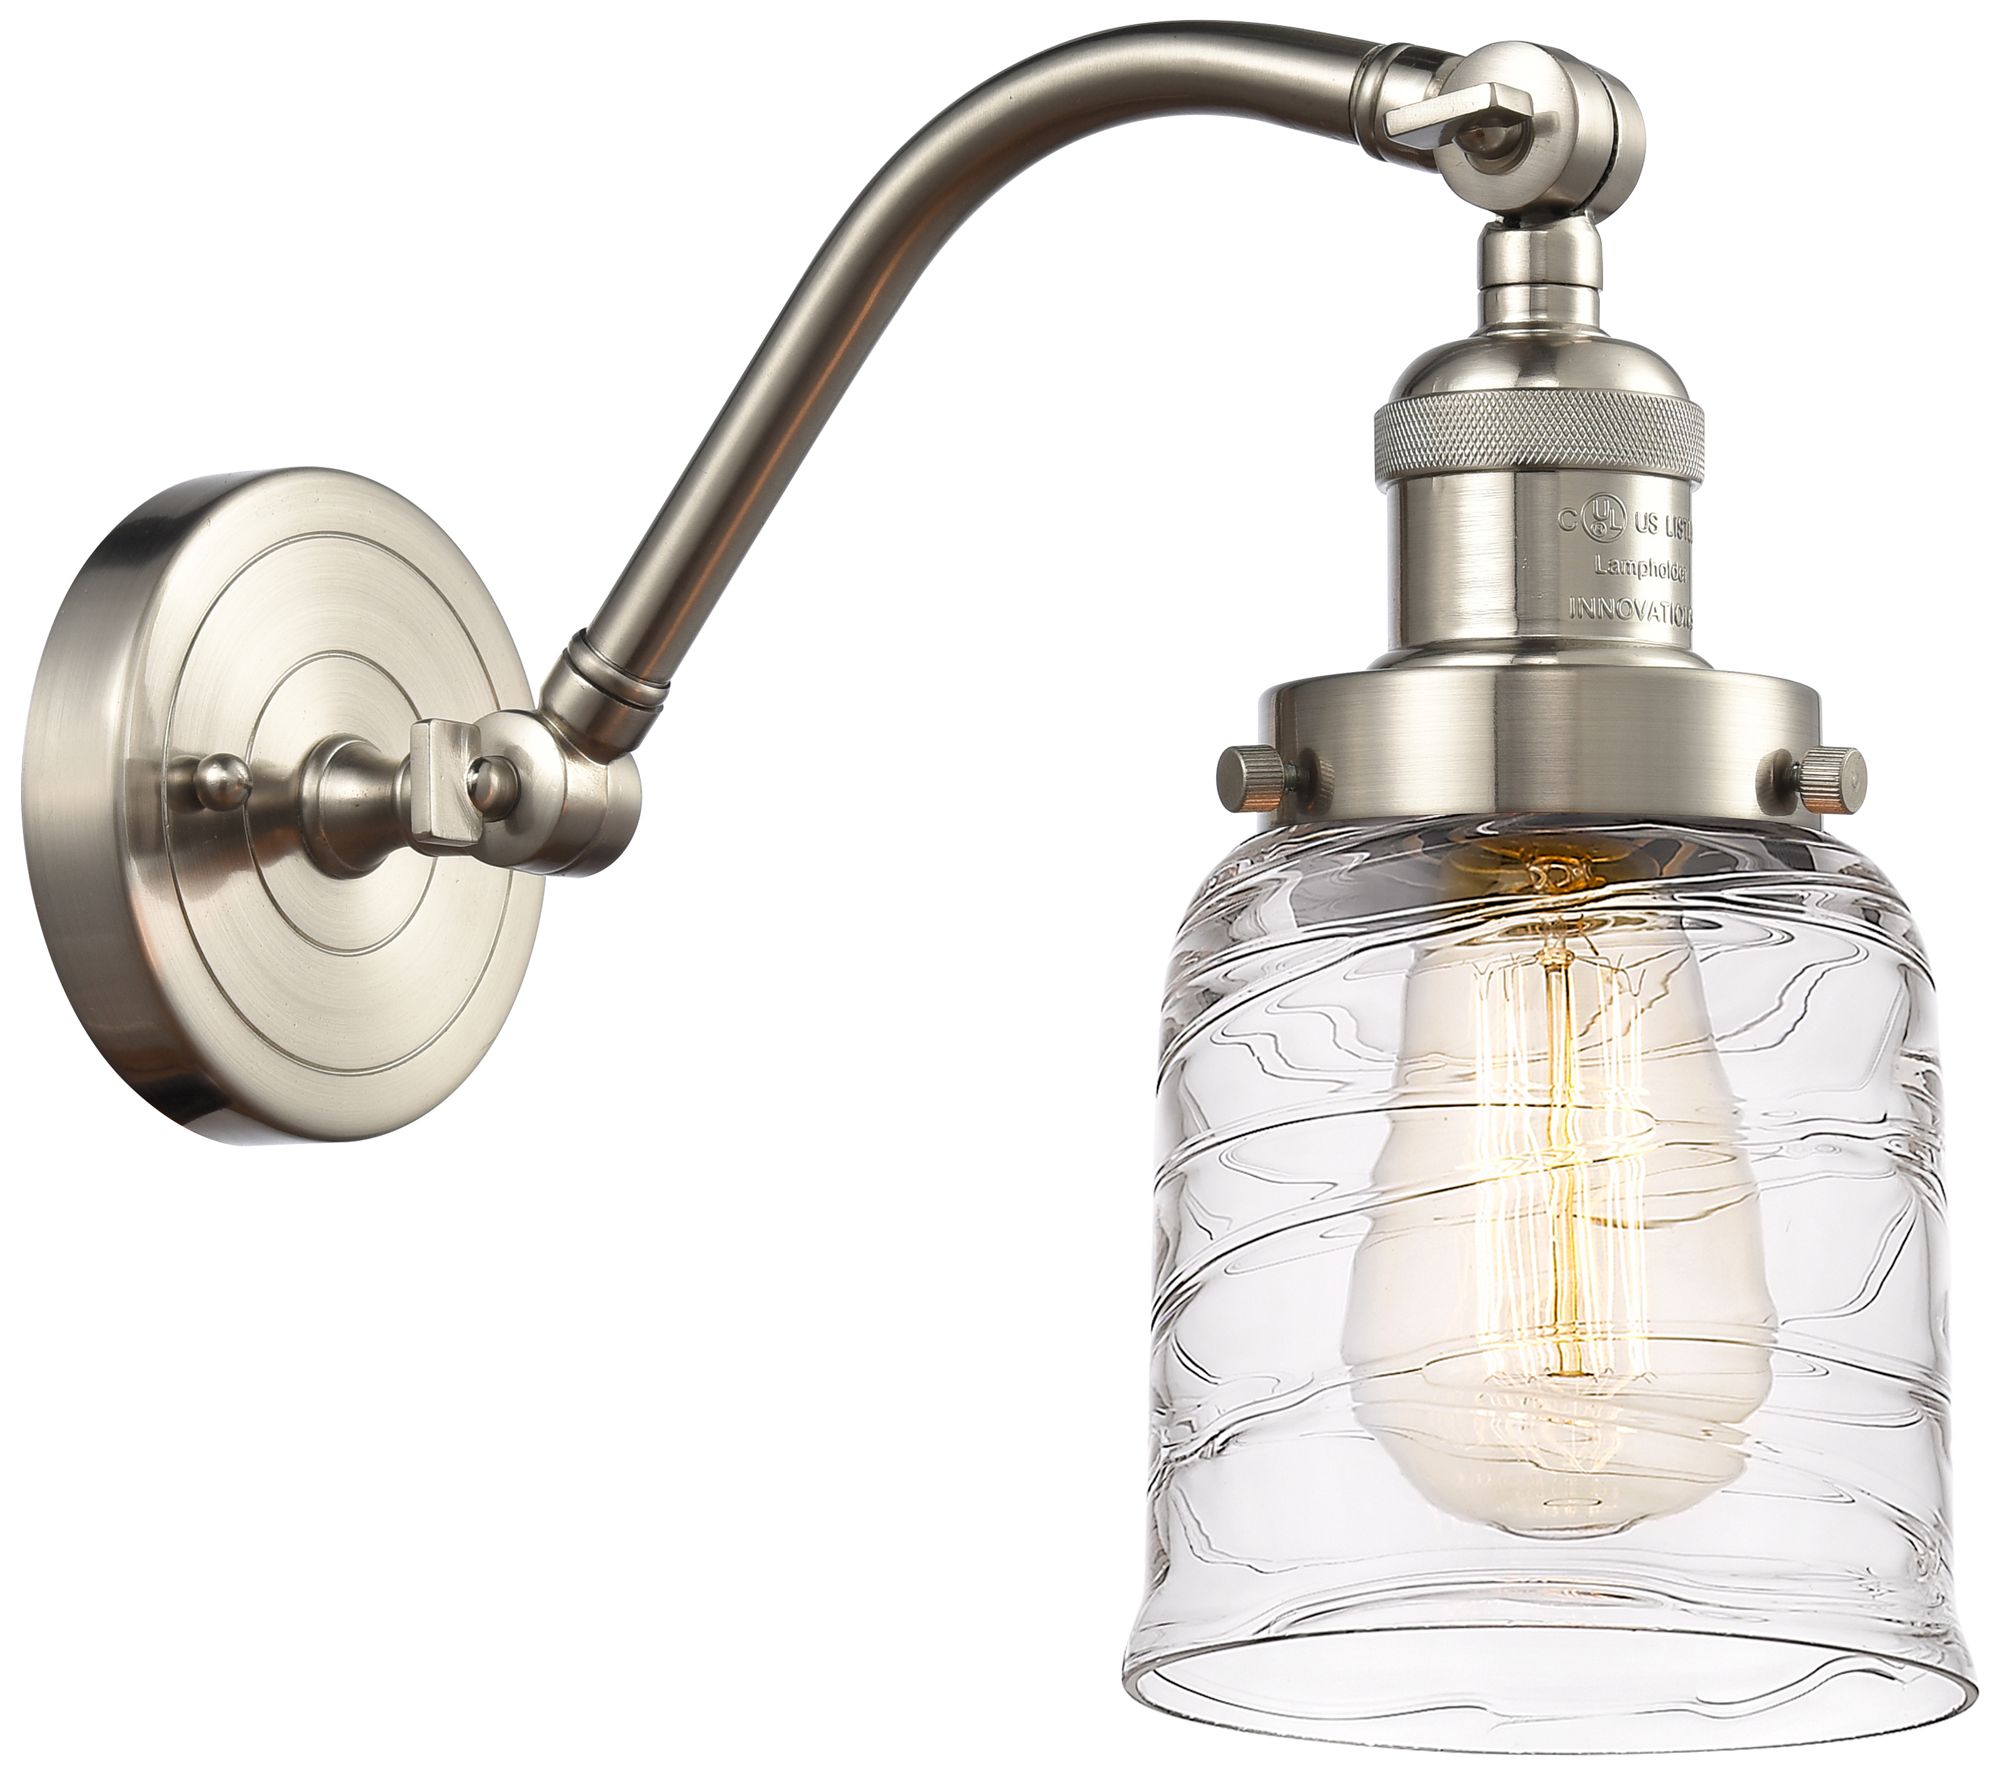 Bell 5" Incandescent Sconce - Nickel Finish - Deco Swirl Shade